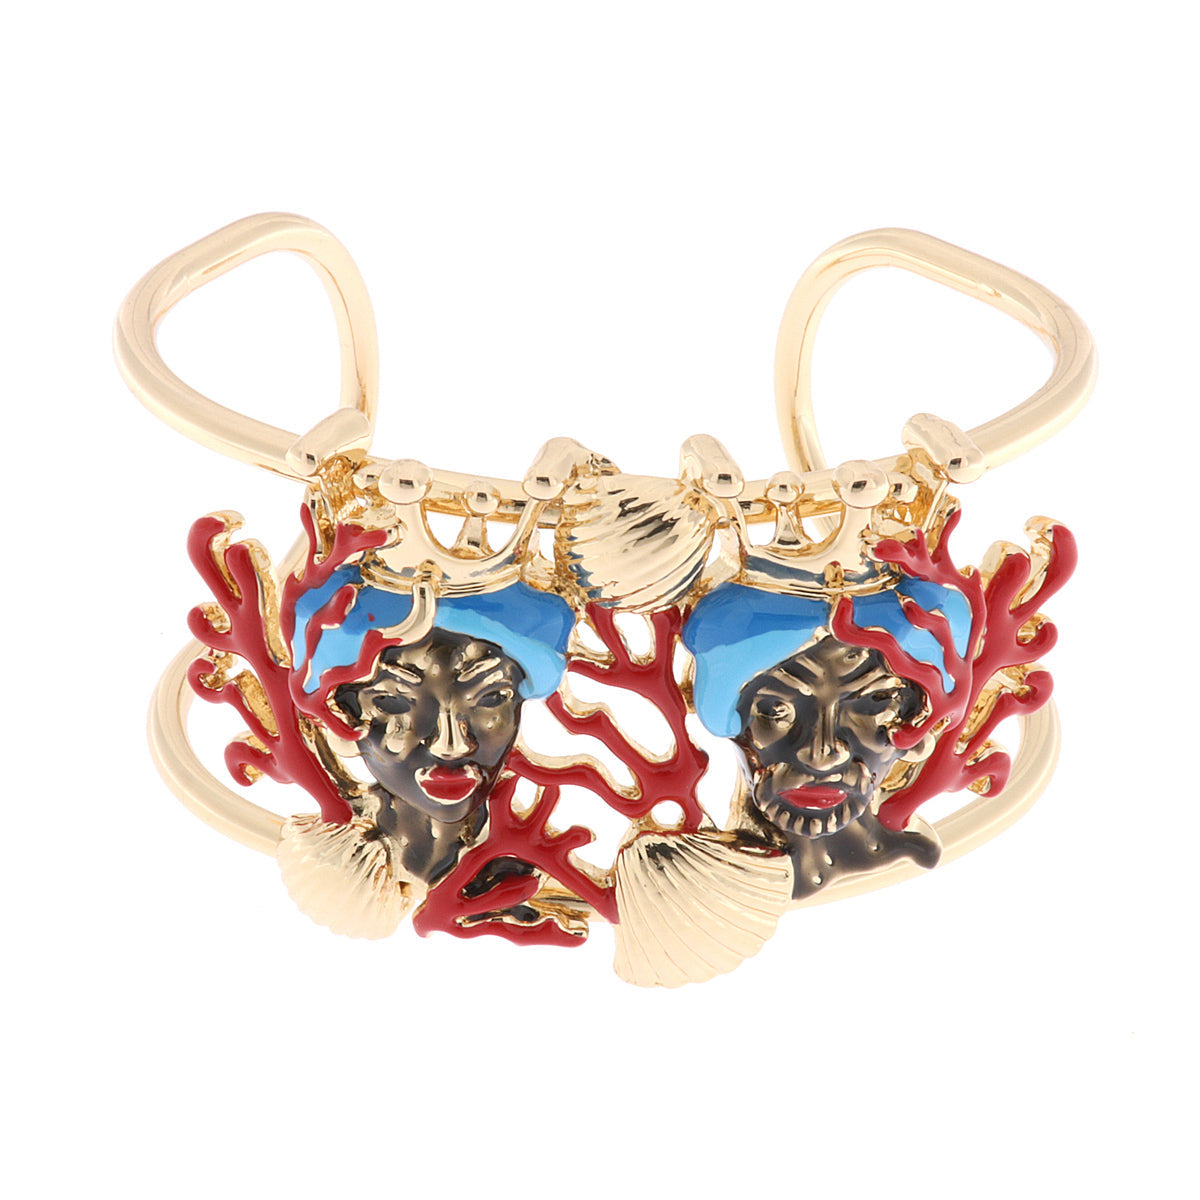 Metal bracelet with Sicilian Moro heads and corals